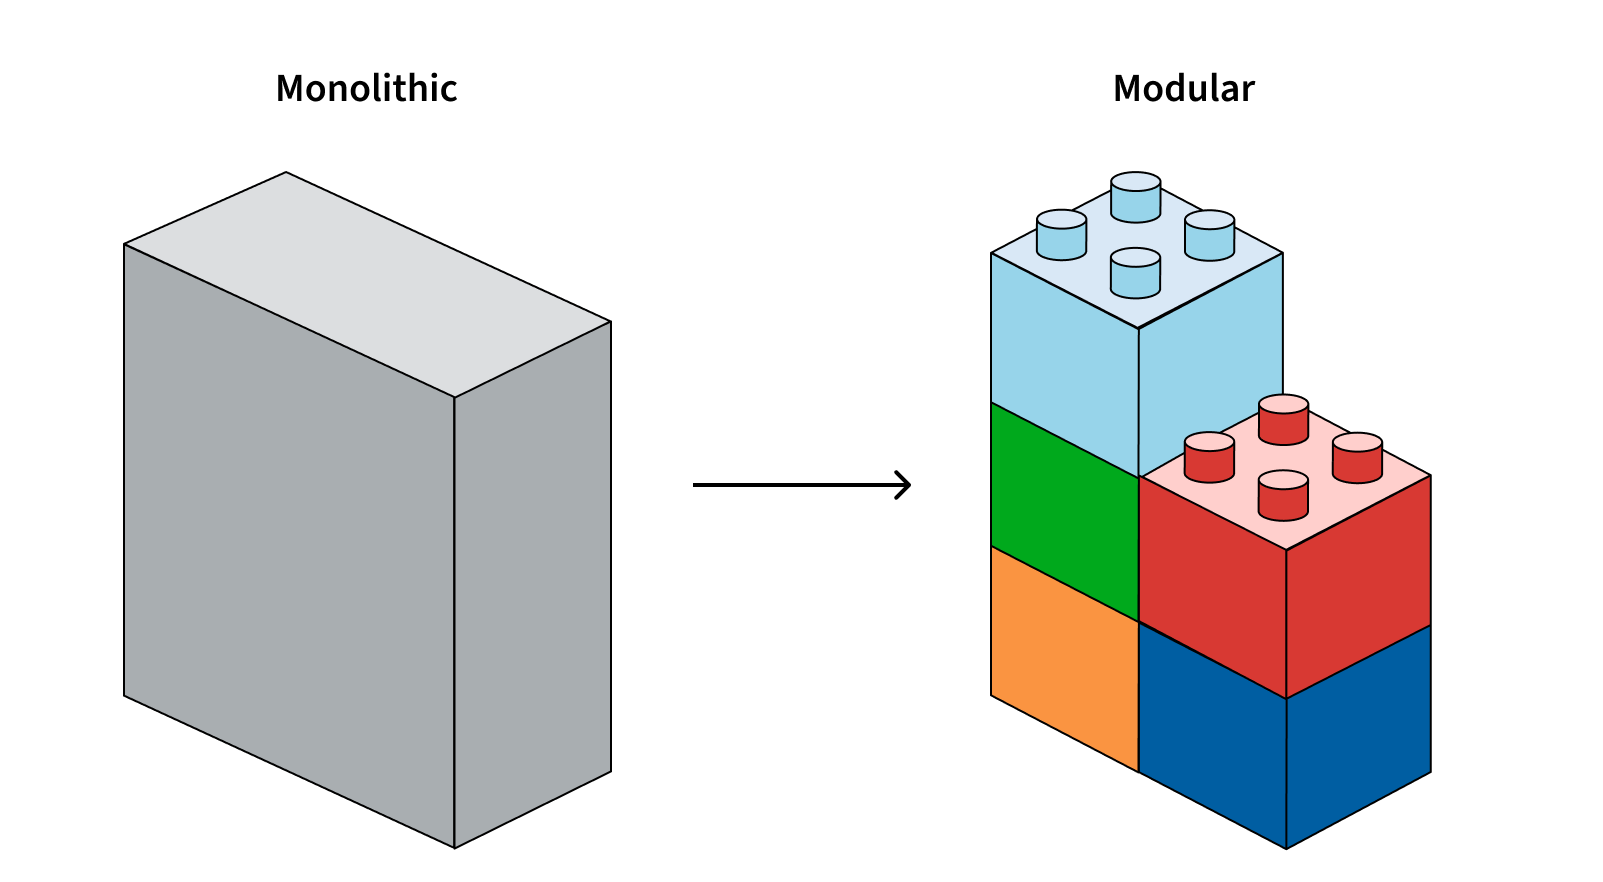 An image illustrating the difference between monolithic development and modular development